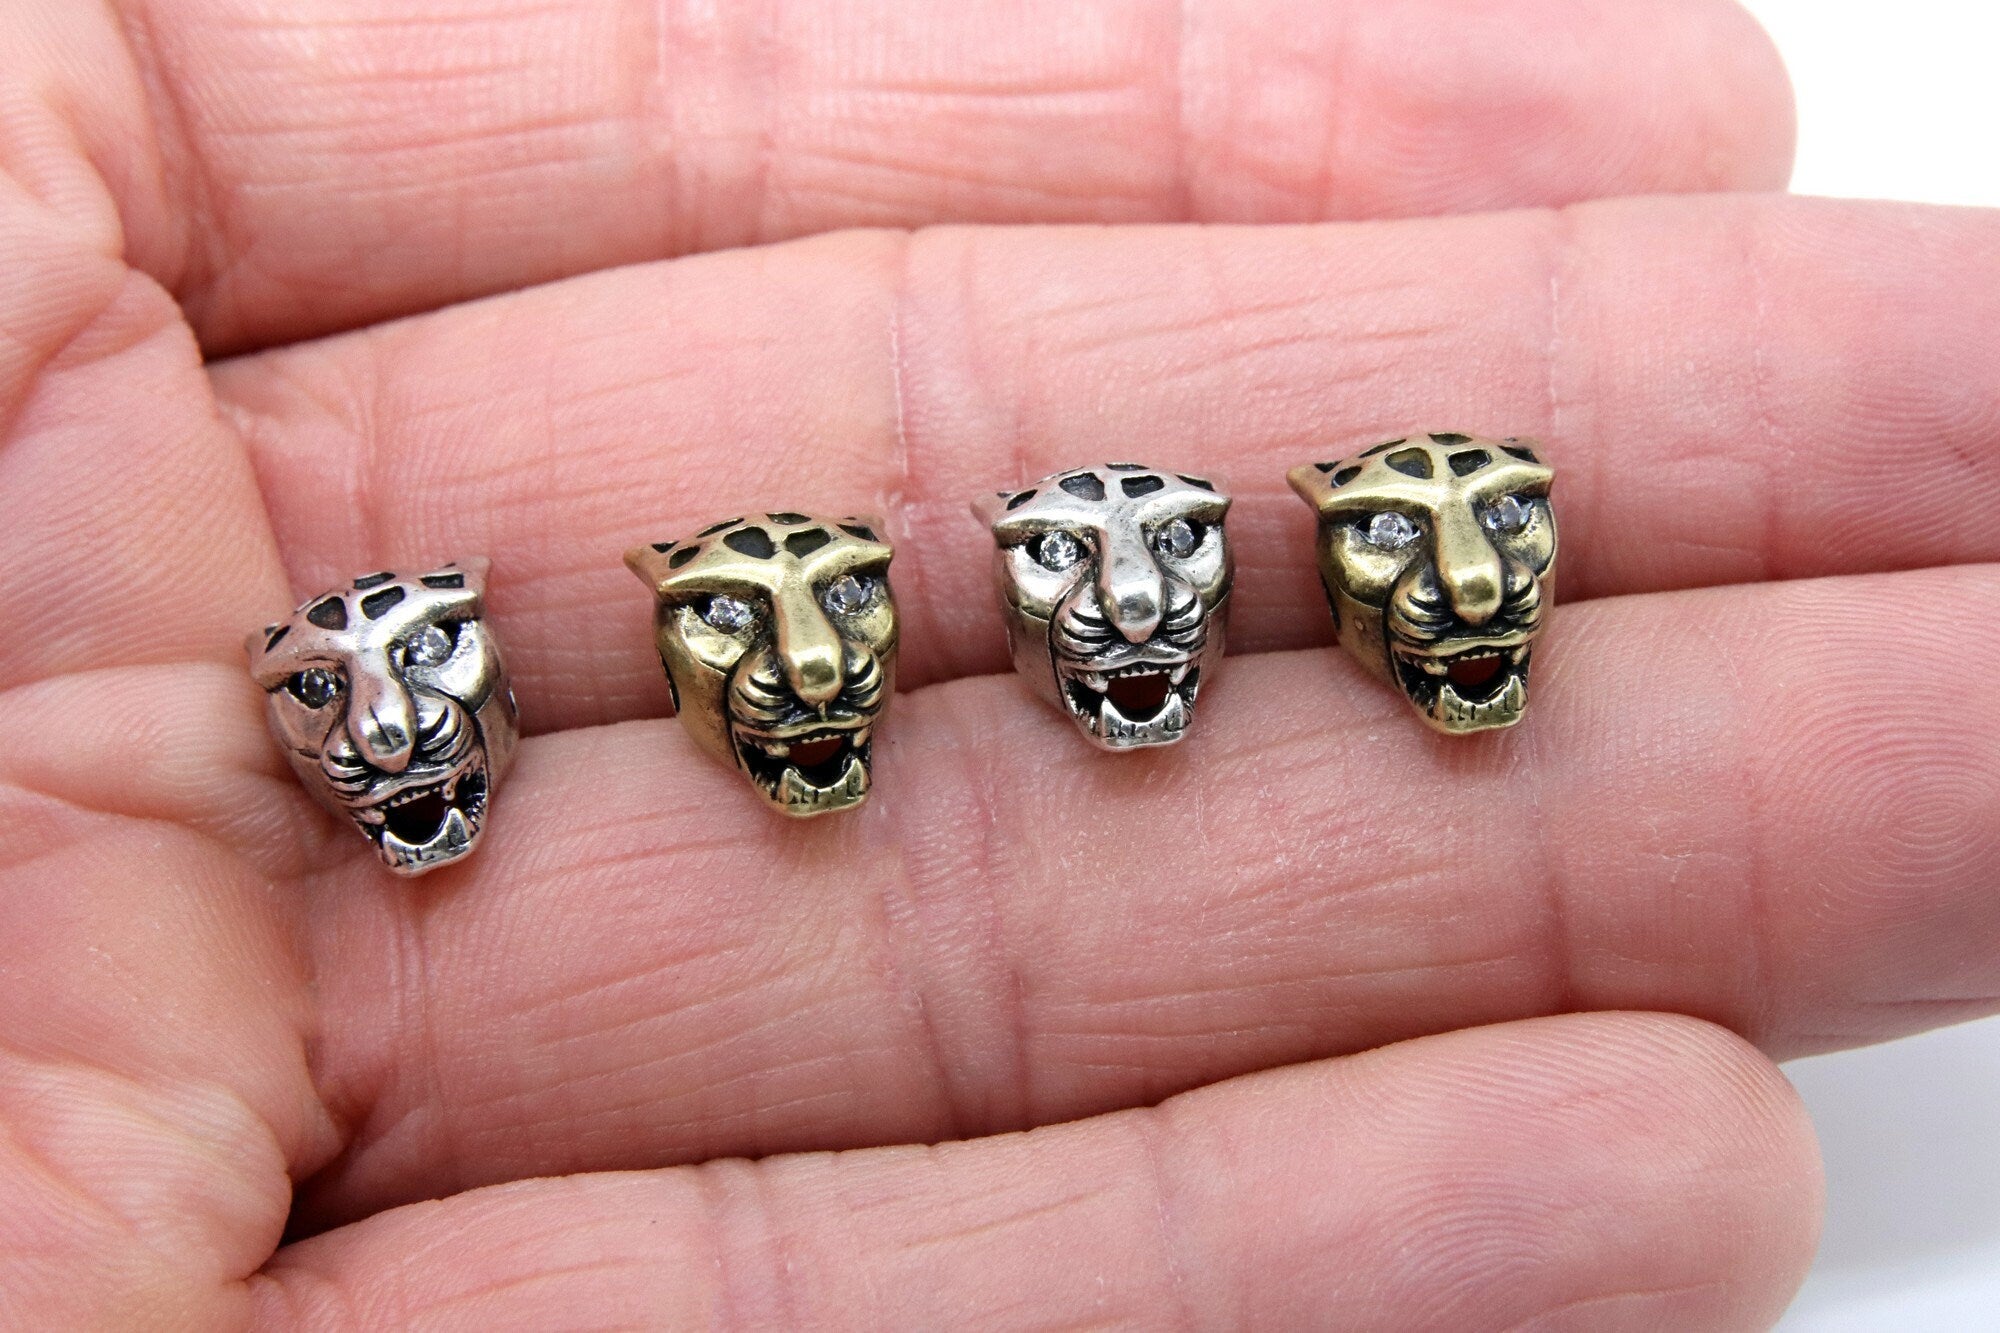 CZ Micro Pave Tiger Head Bead Charm, Leopard Head CZ Eye Panther Cat Heads #914, Antique Copper Gold, Silver Animal Head Bead, Men's Jewelry